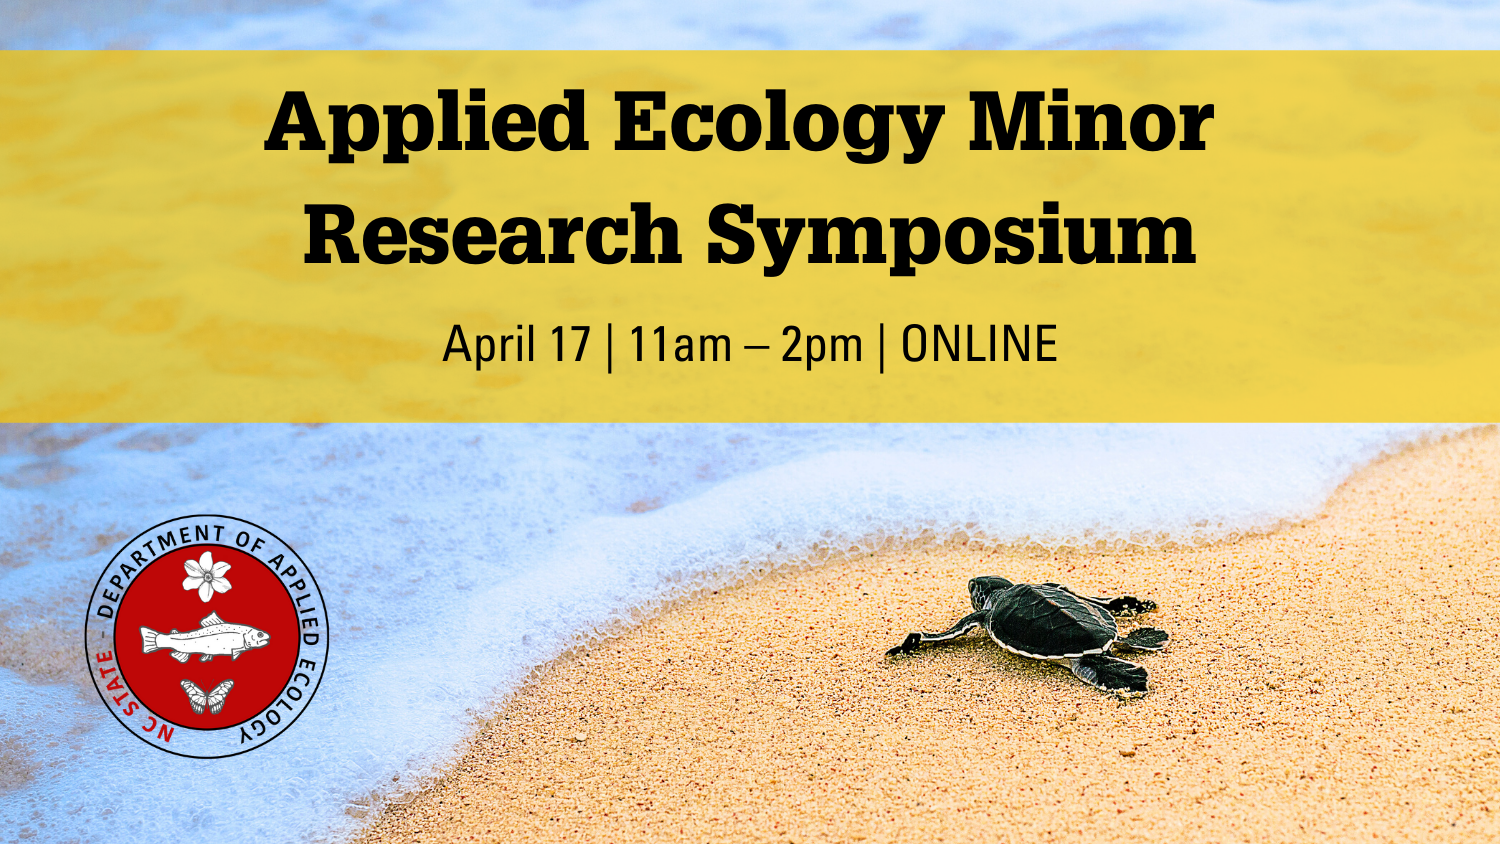 Applied Ecology minor research symposium